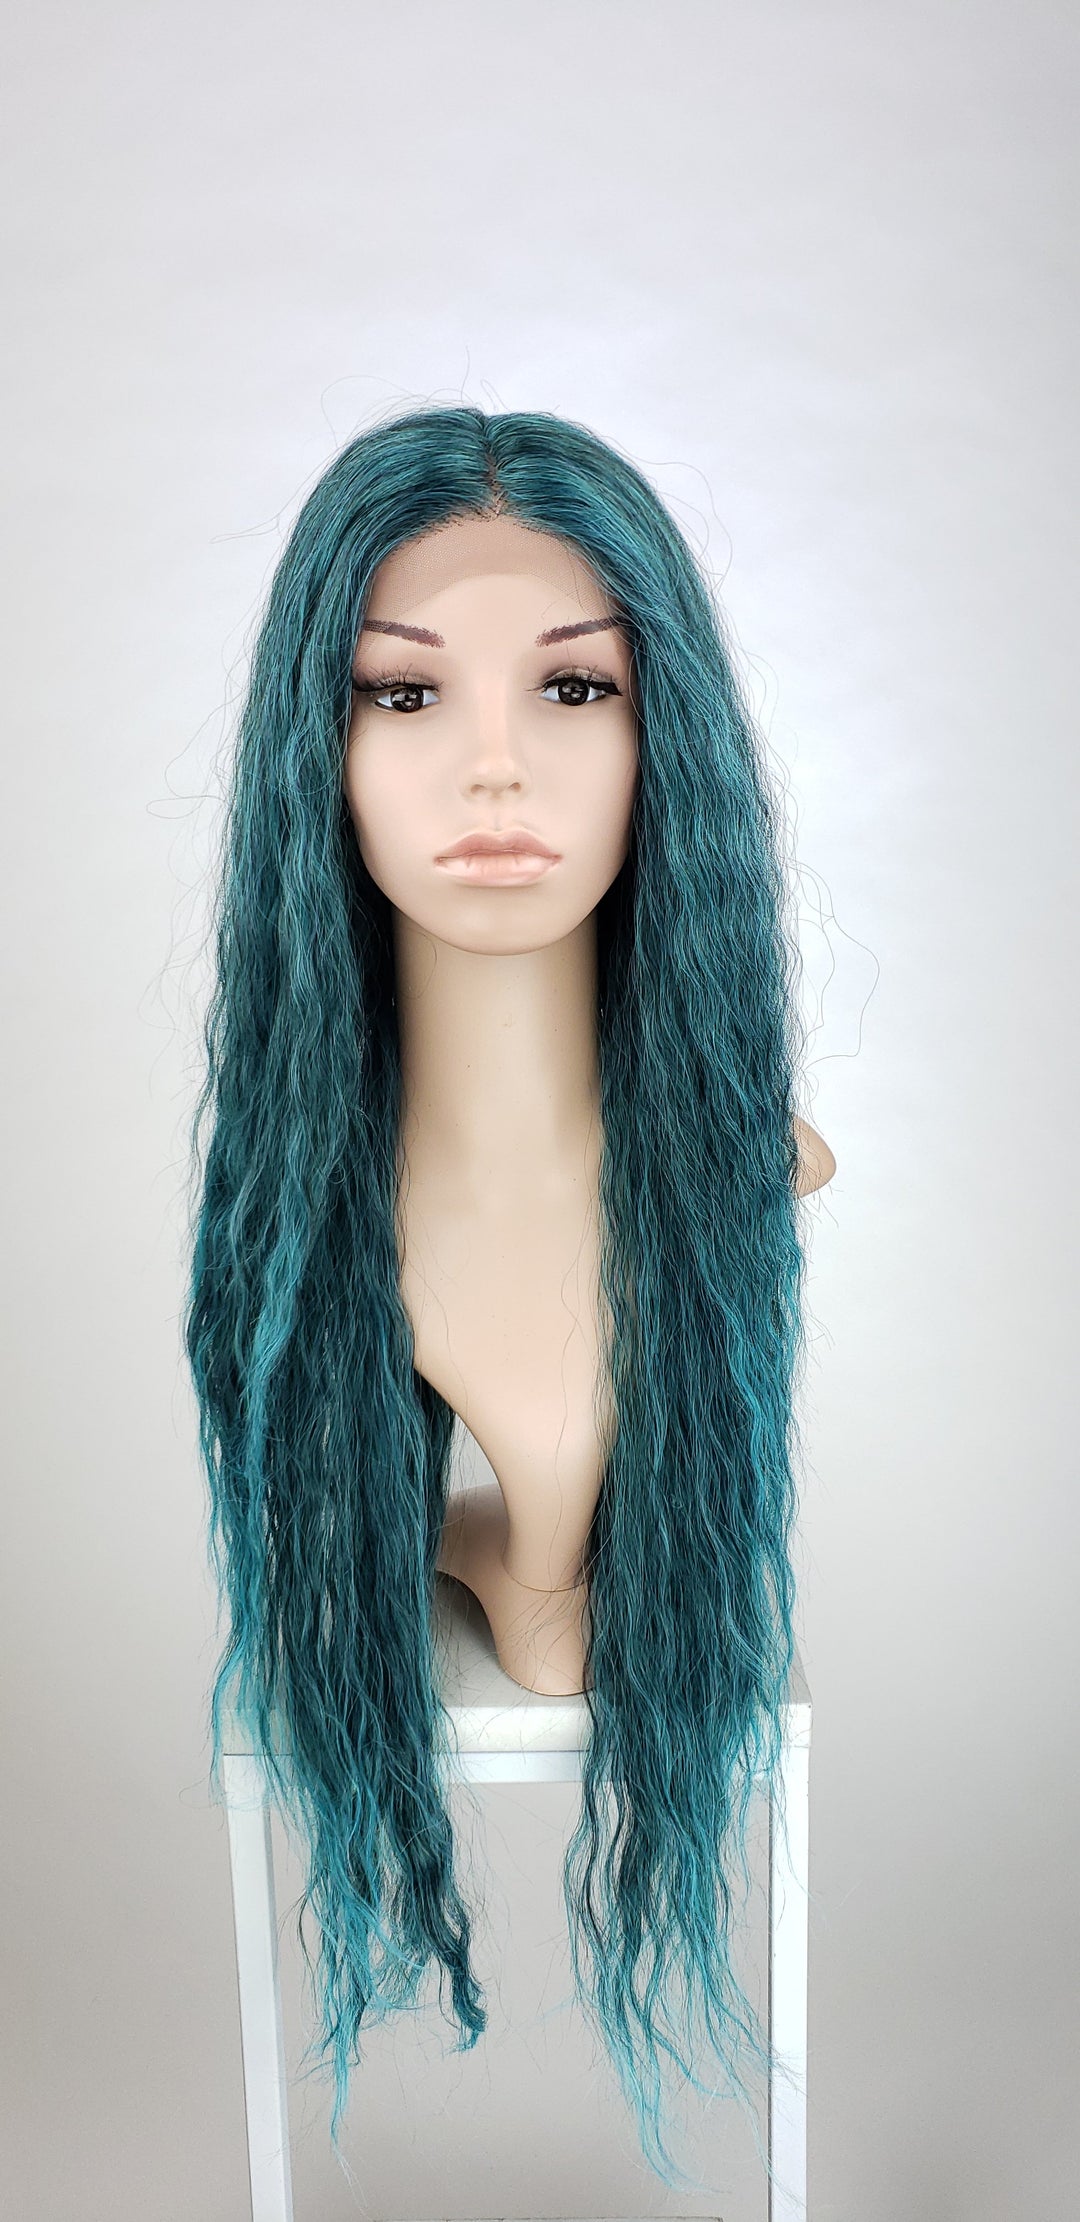 Pose Wigs Teal Green Ombre Long Curly Lace Front Wig - Duchess Series LDRVN88